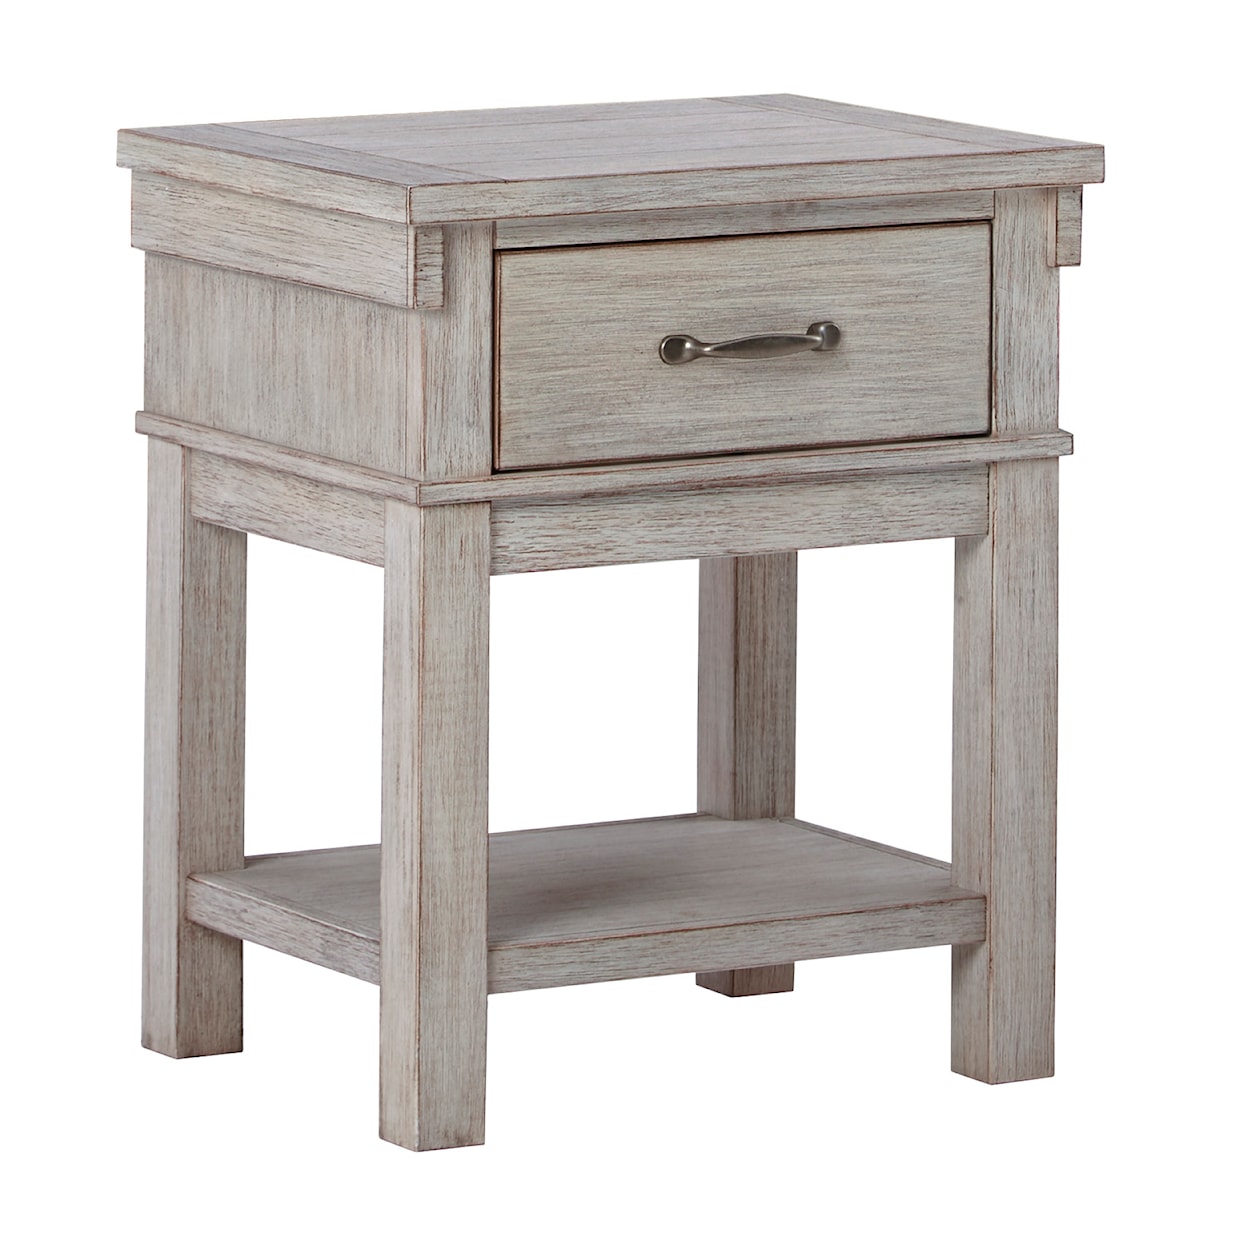 Signature Design by Ashley Hollentown Nightstand